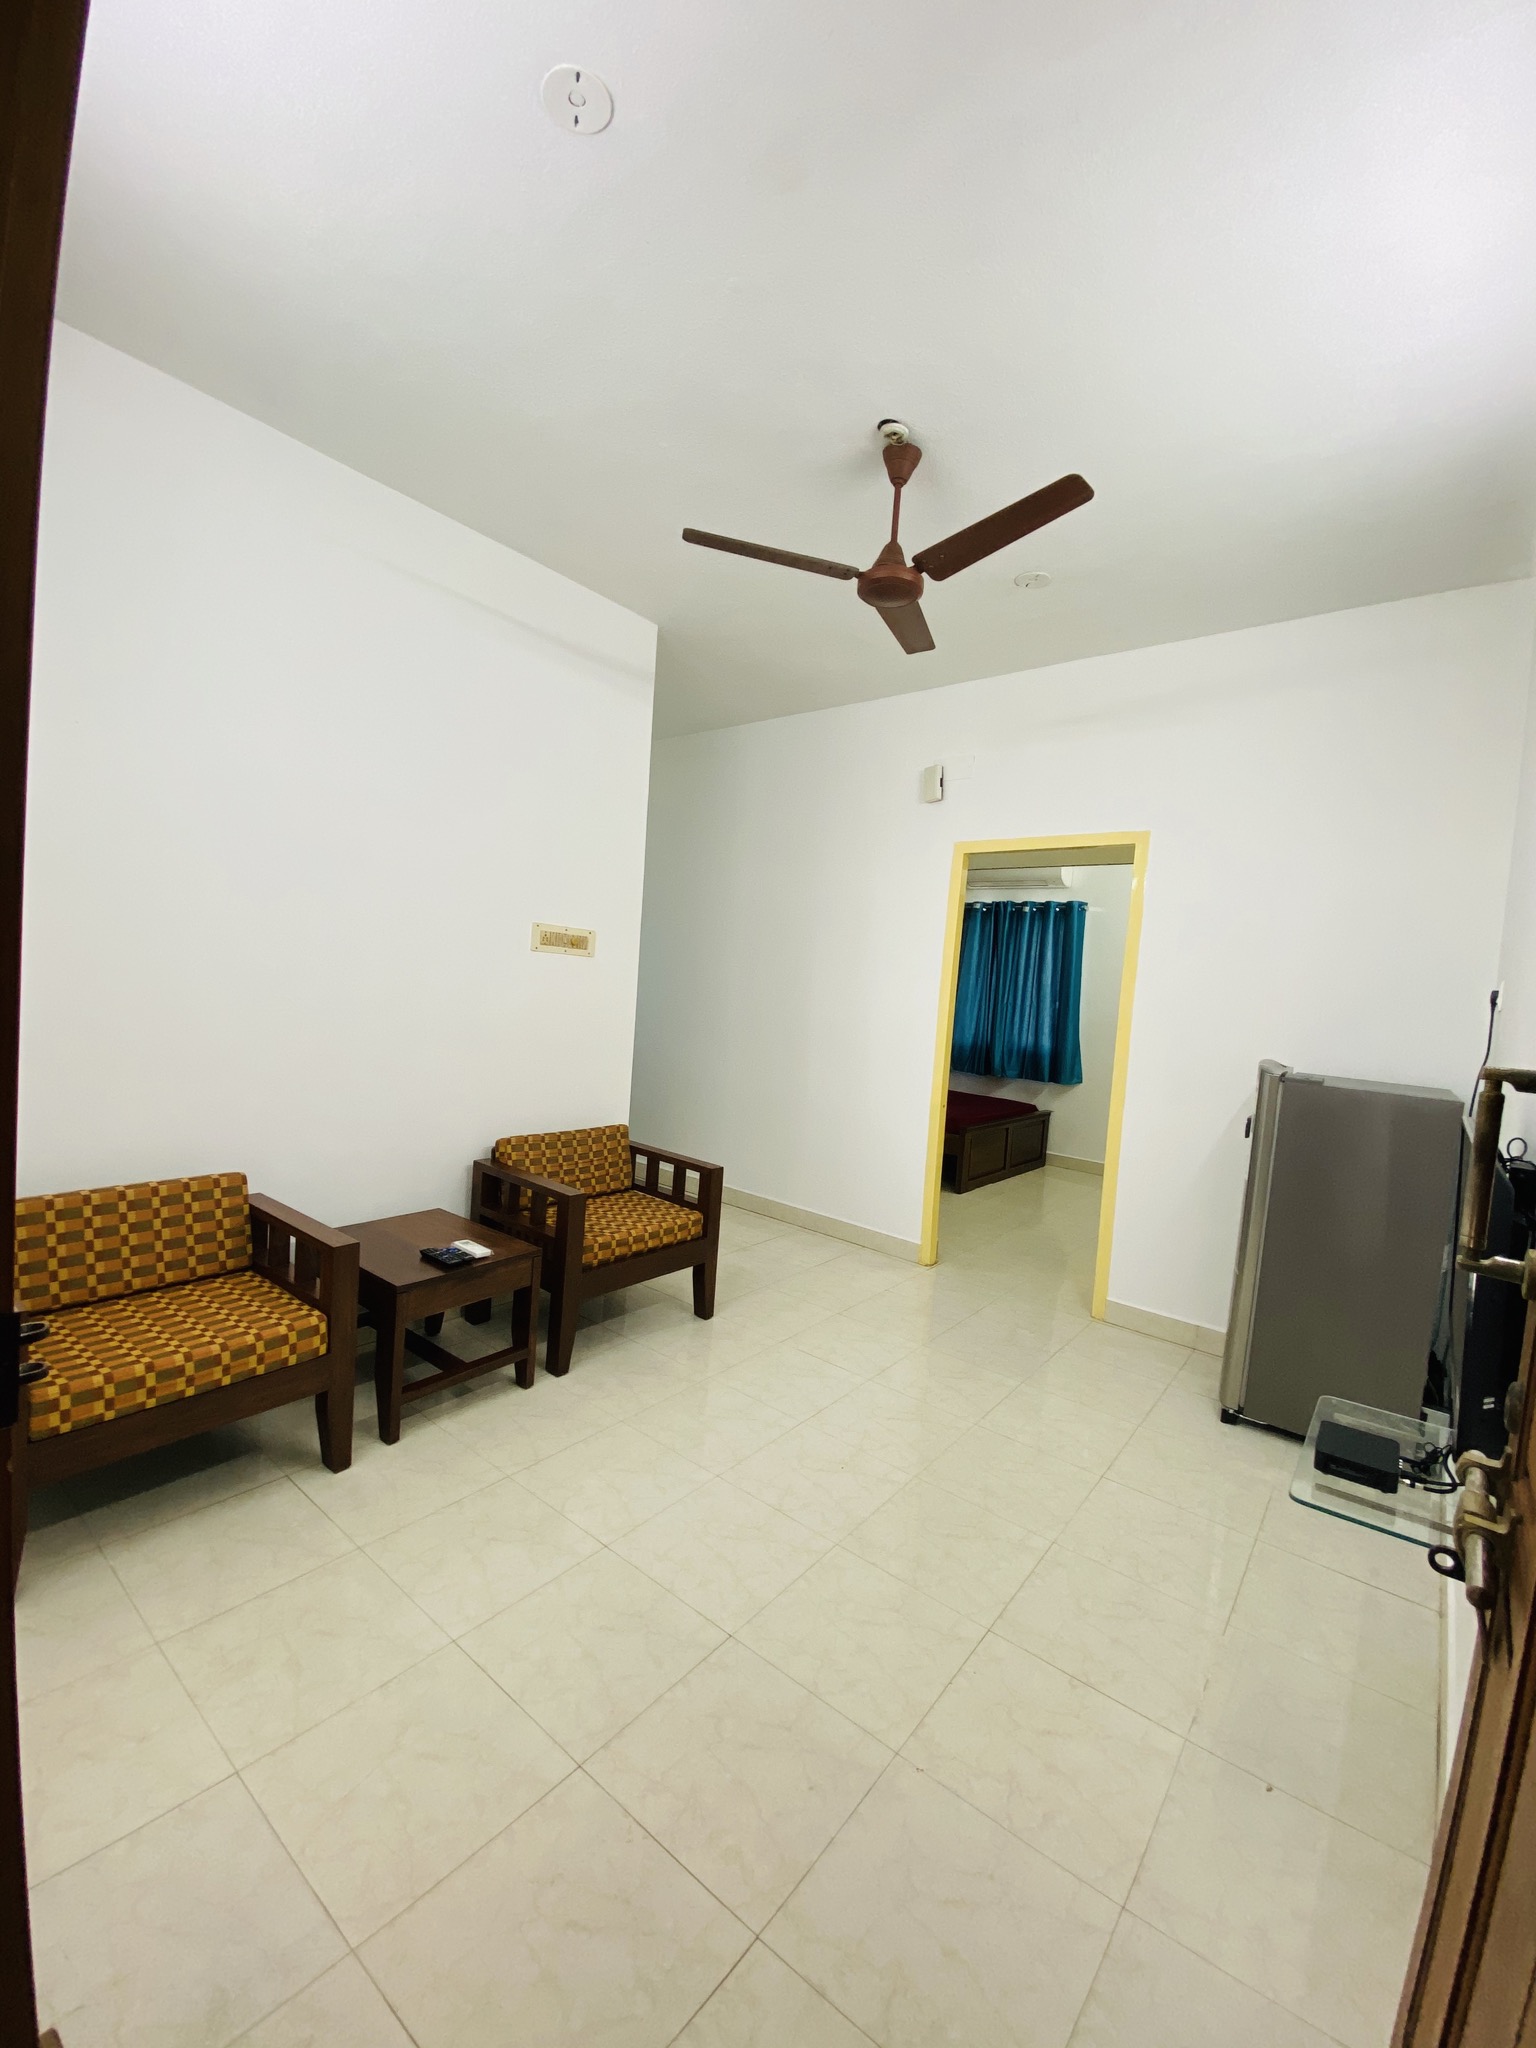 1 BHK Residential Apartment for Rent Only in Perambur